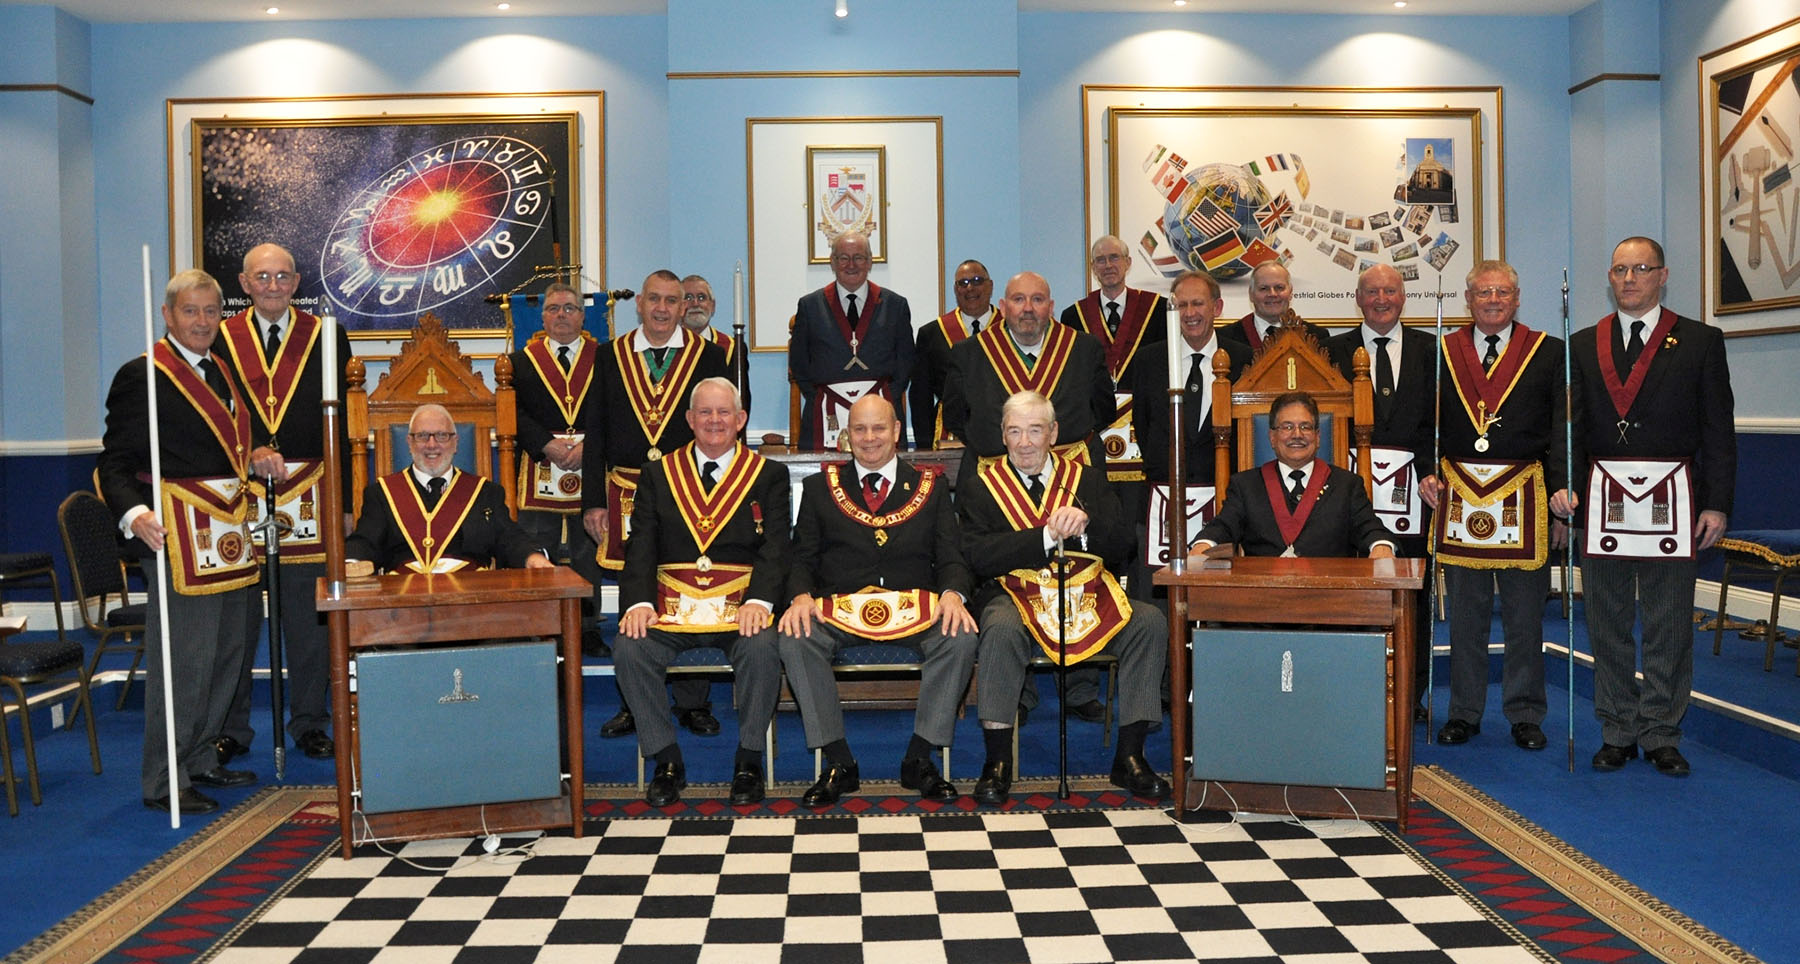 Official Visit by the Deputy Provincial Grand Master to the Court of Sion Abbey